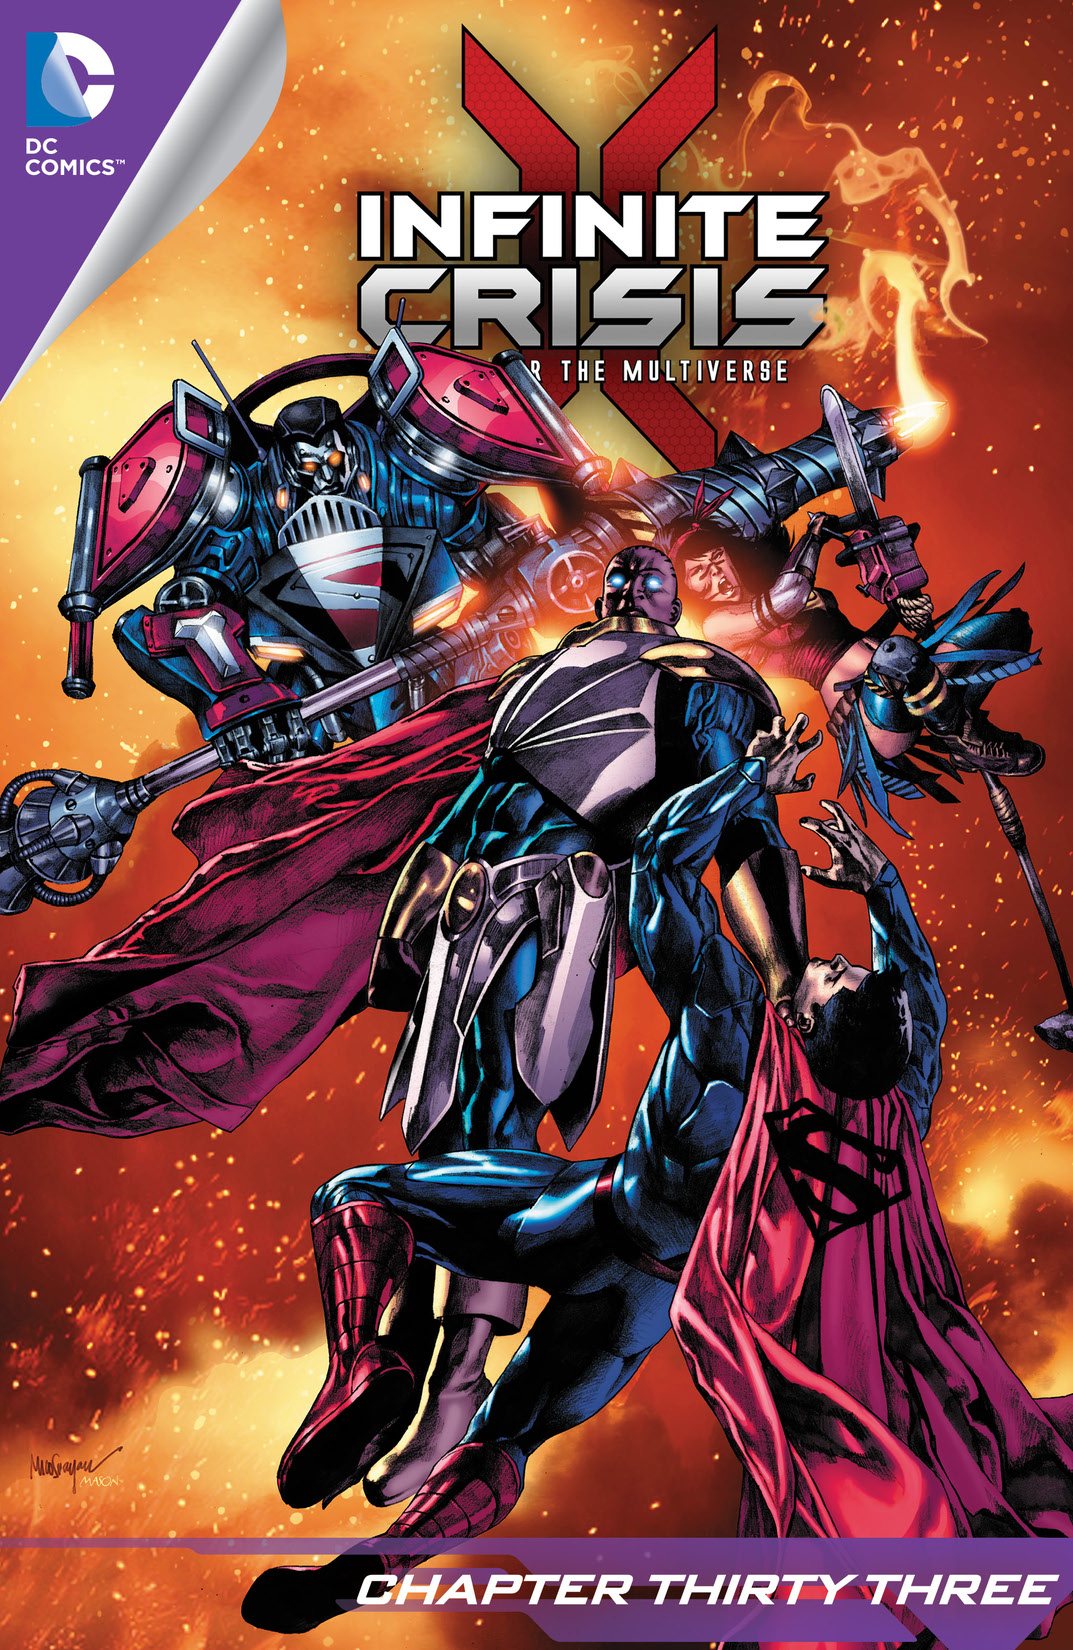 Infinite Crisis: Fight for the Multiverse #33 preview images